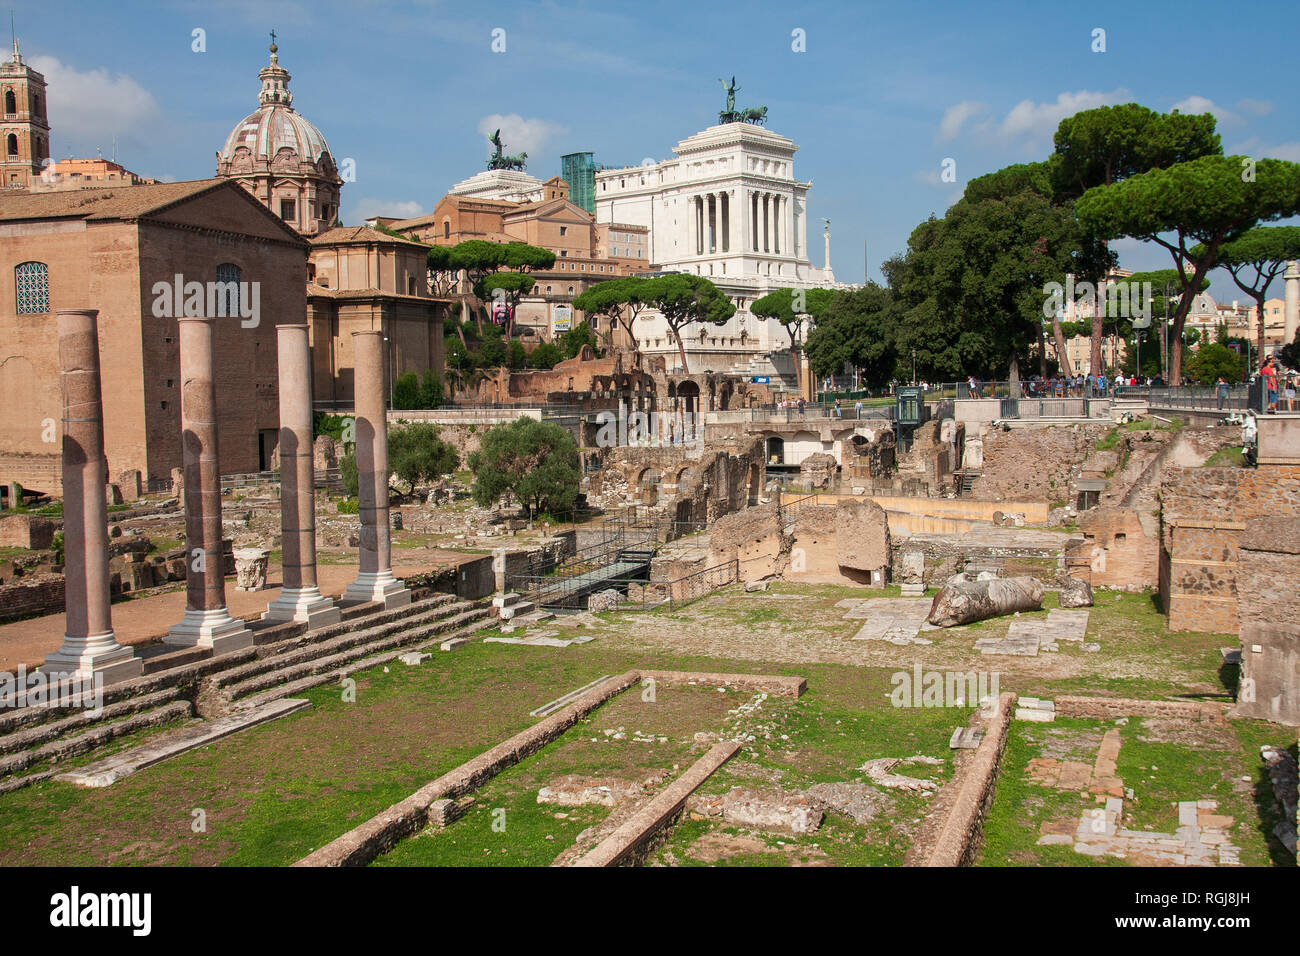 Forums ancient Rome, Italy, Europe Stock Photo